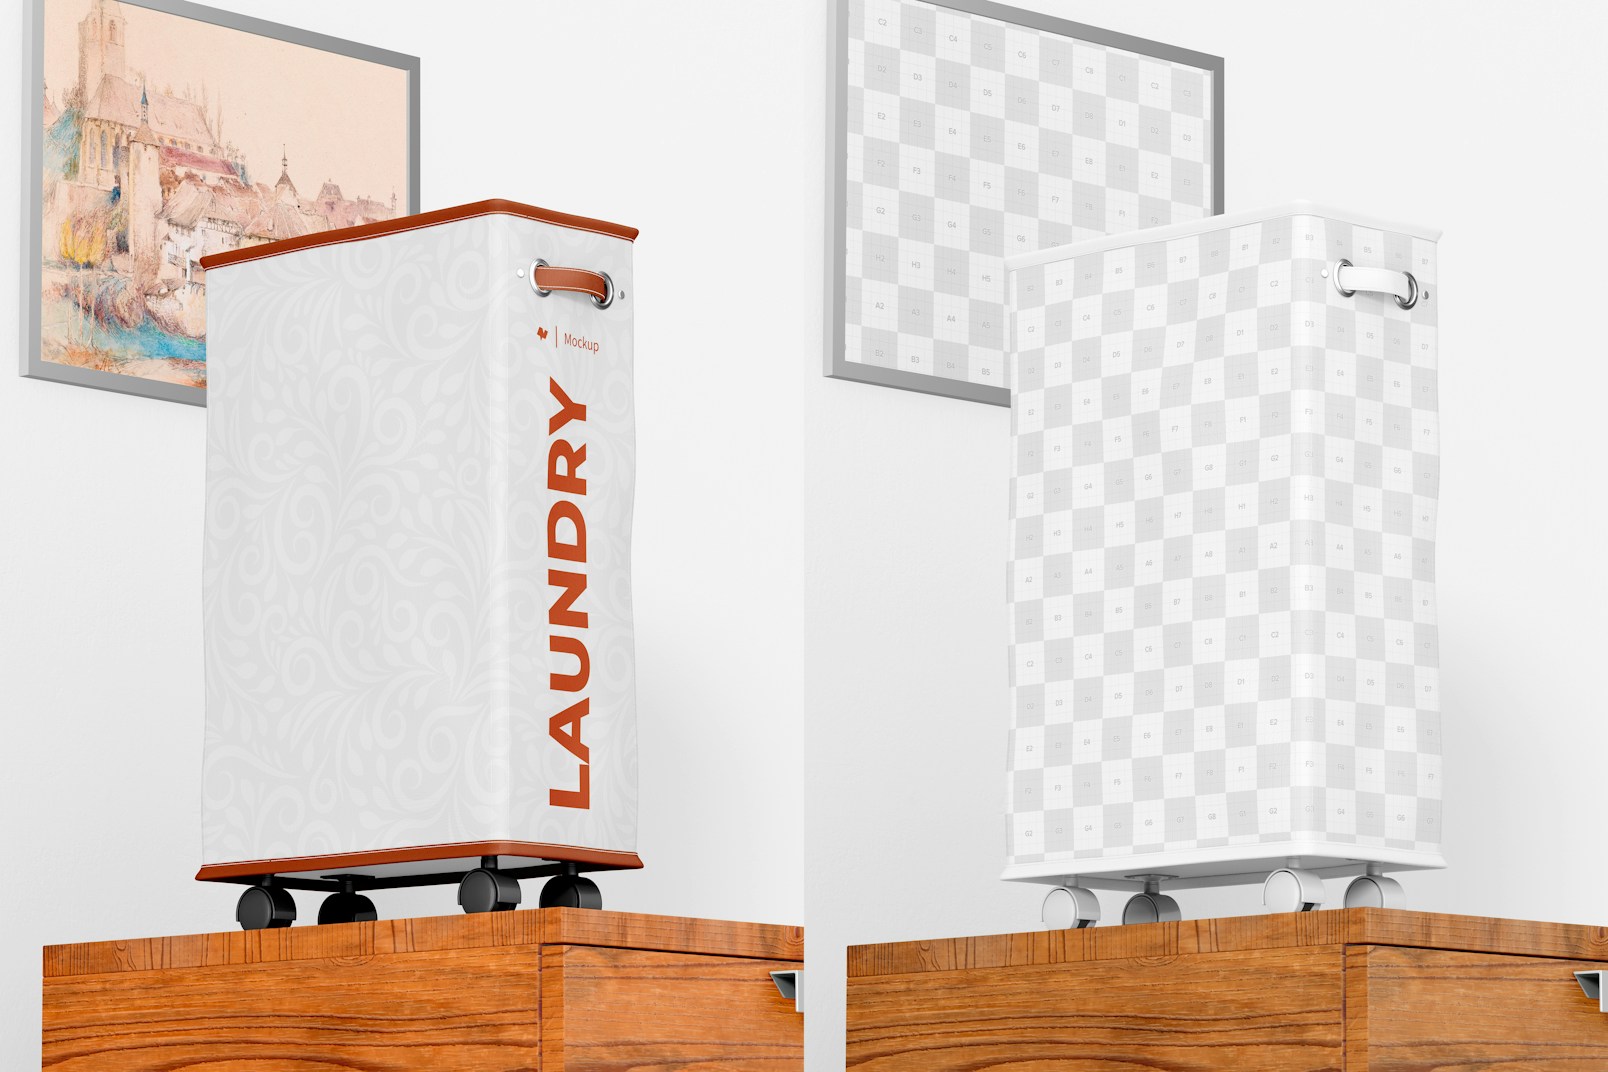 Large Laundry Hamper Mockup, Low Angle View